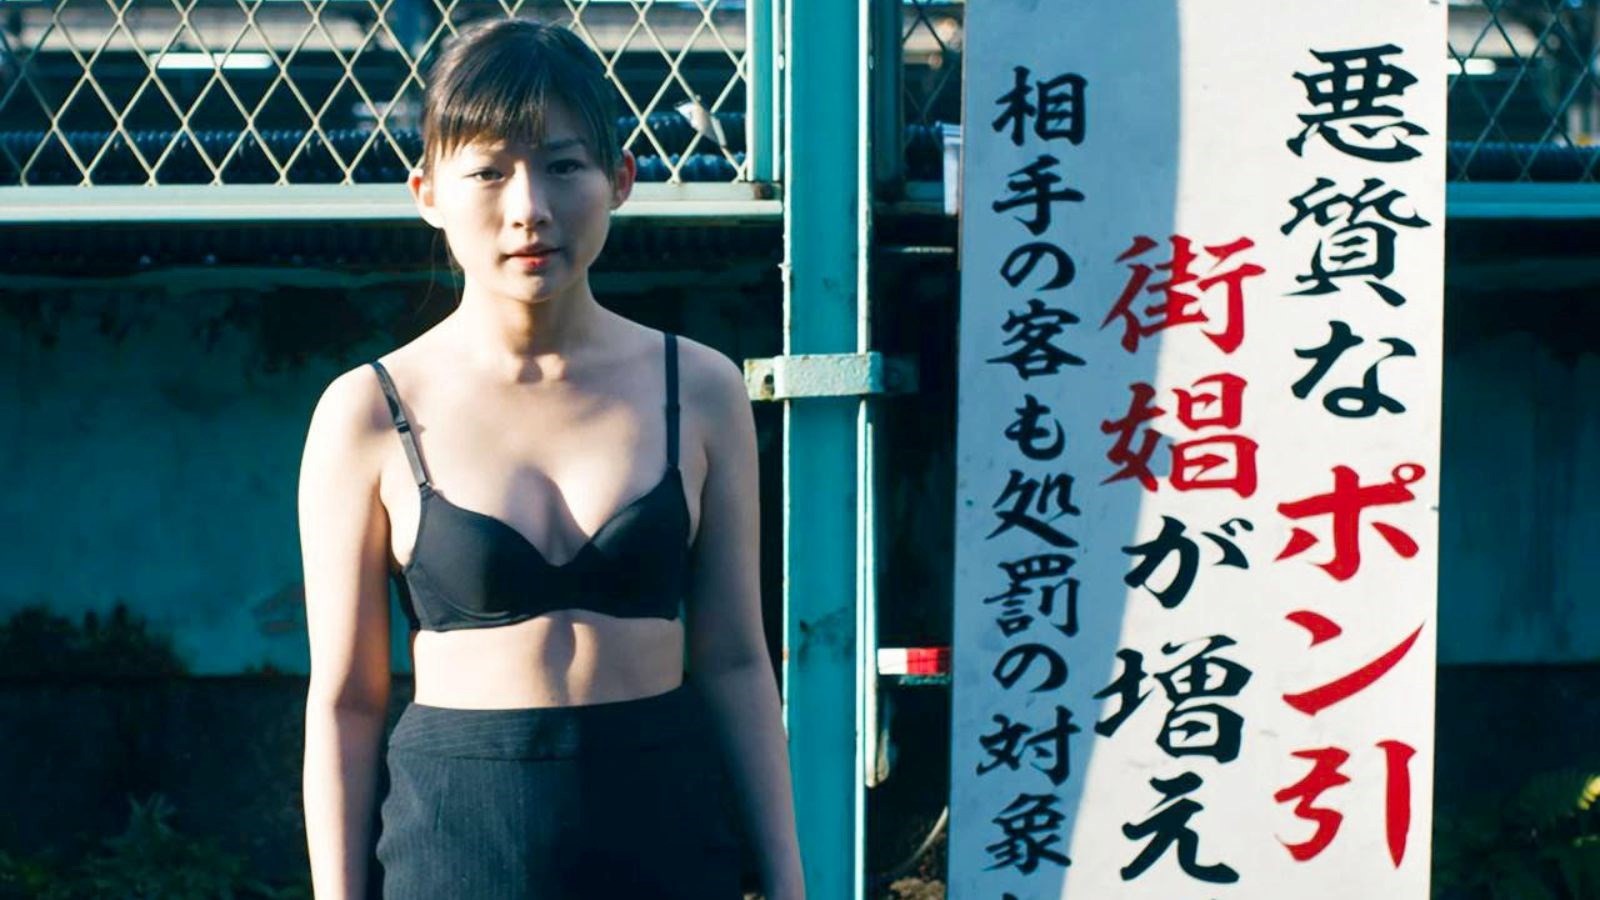 Japanese Naked School - Dark Minds: Seven Highlights From the Japan Foundation's Film Festival |  AnOther